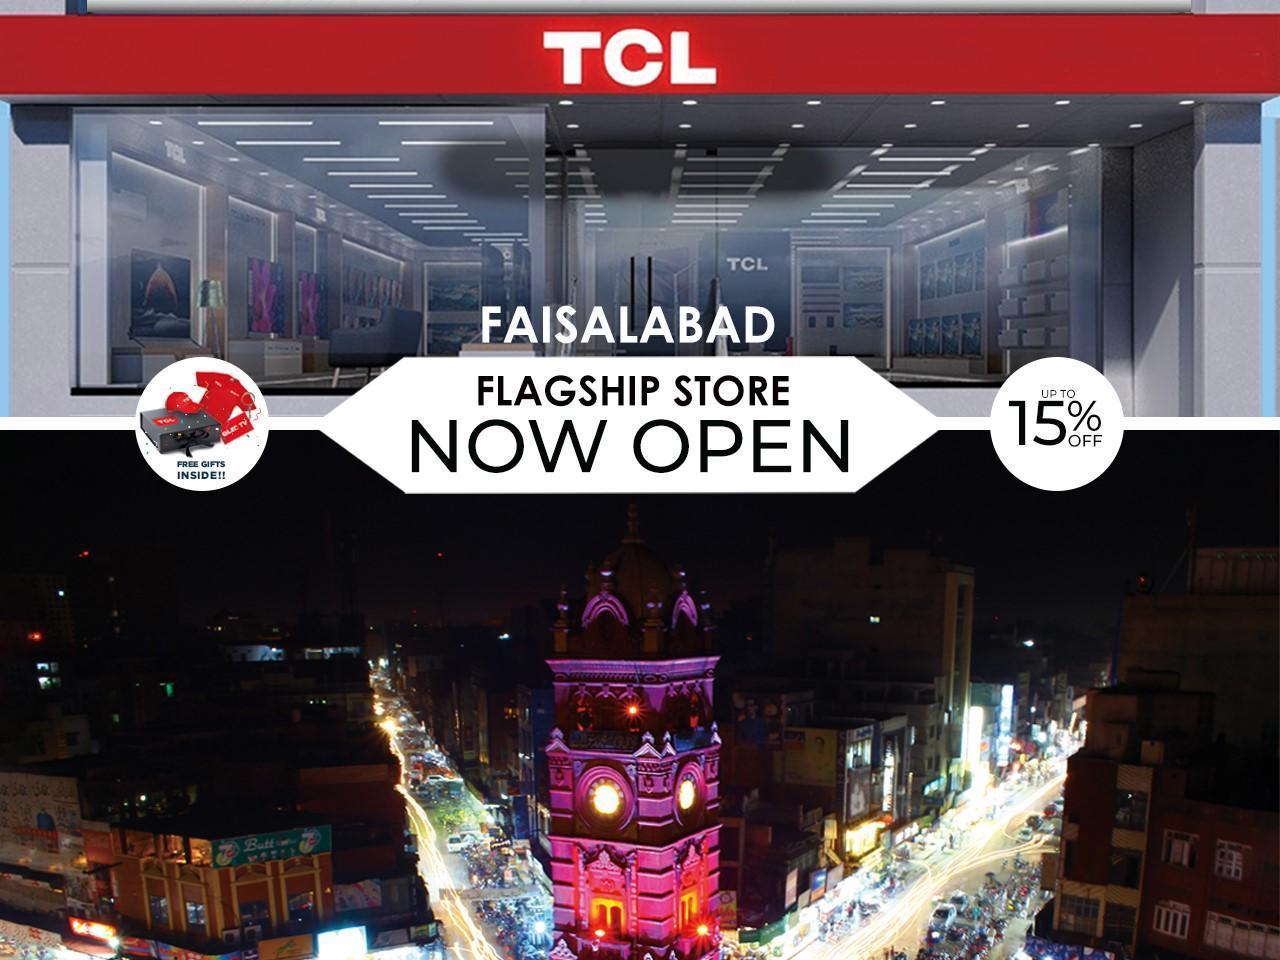 TCL opens its first flagship store in Faisalabad